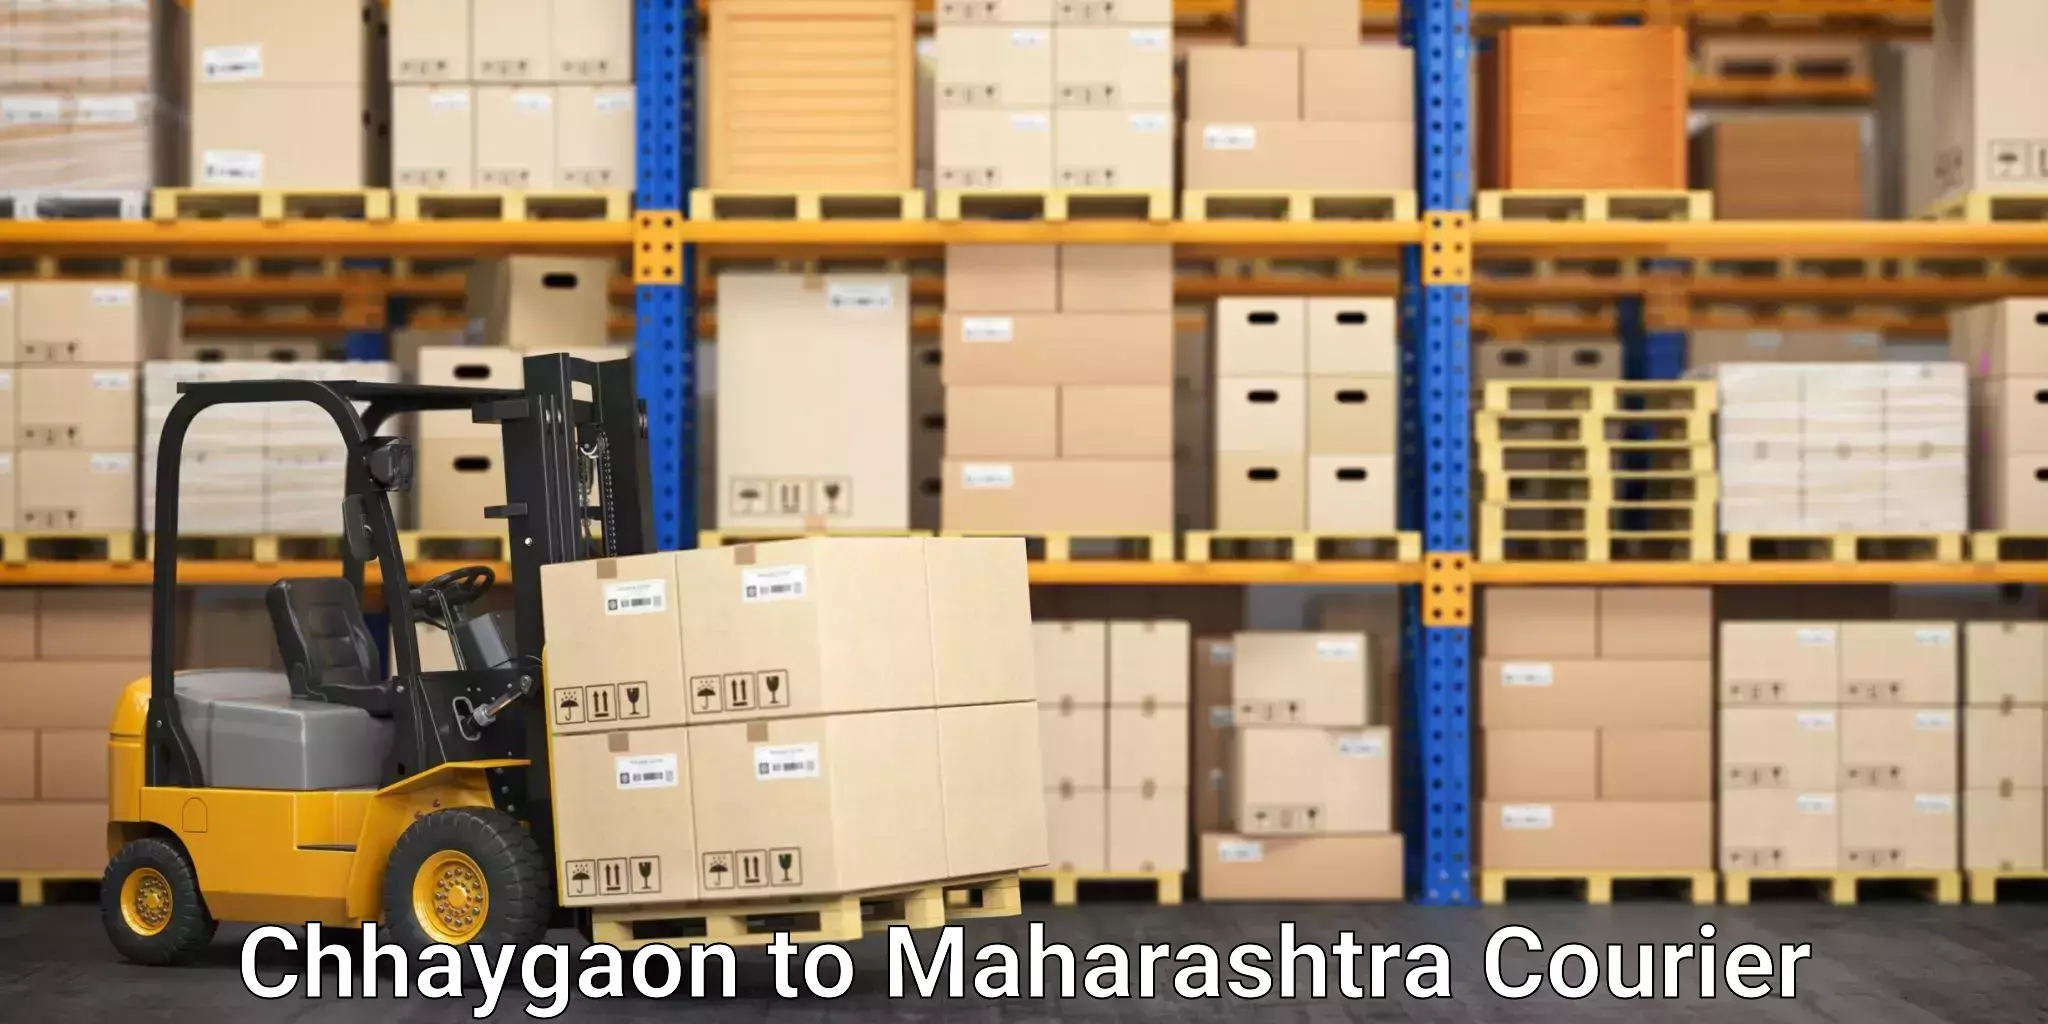 Efficient courier operations Chhaygaon to Parbhani